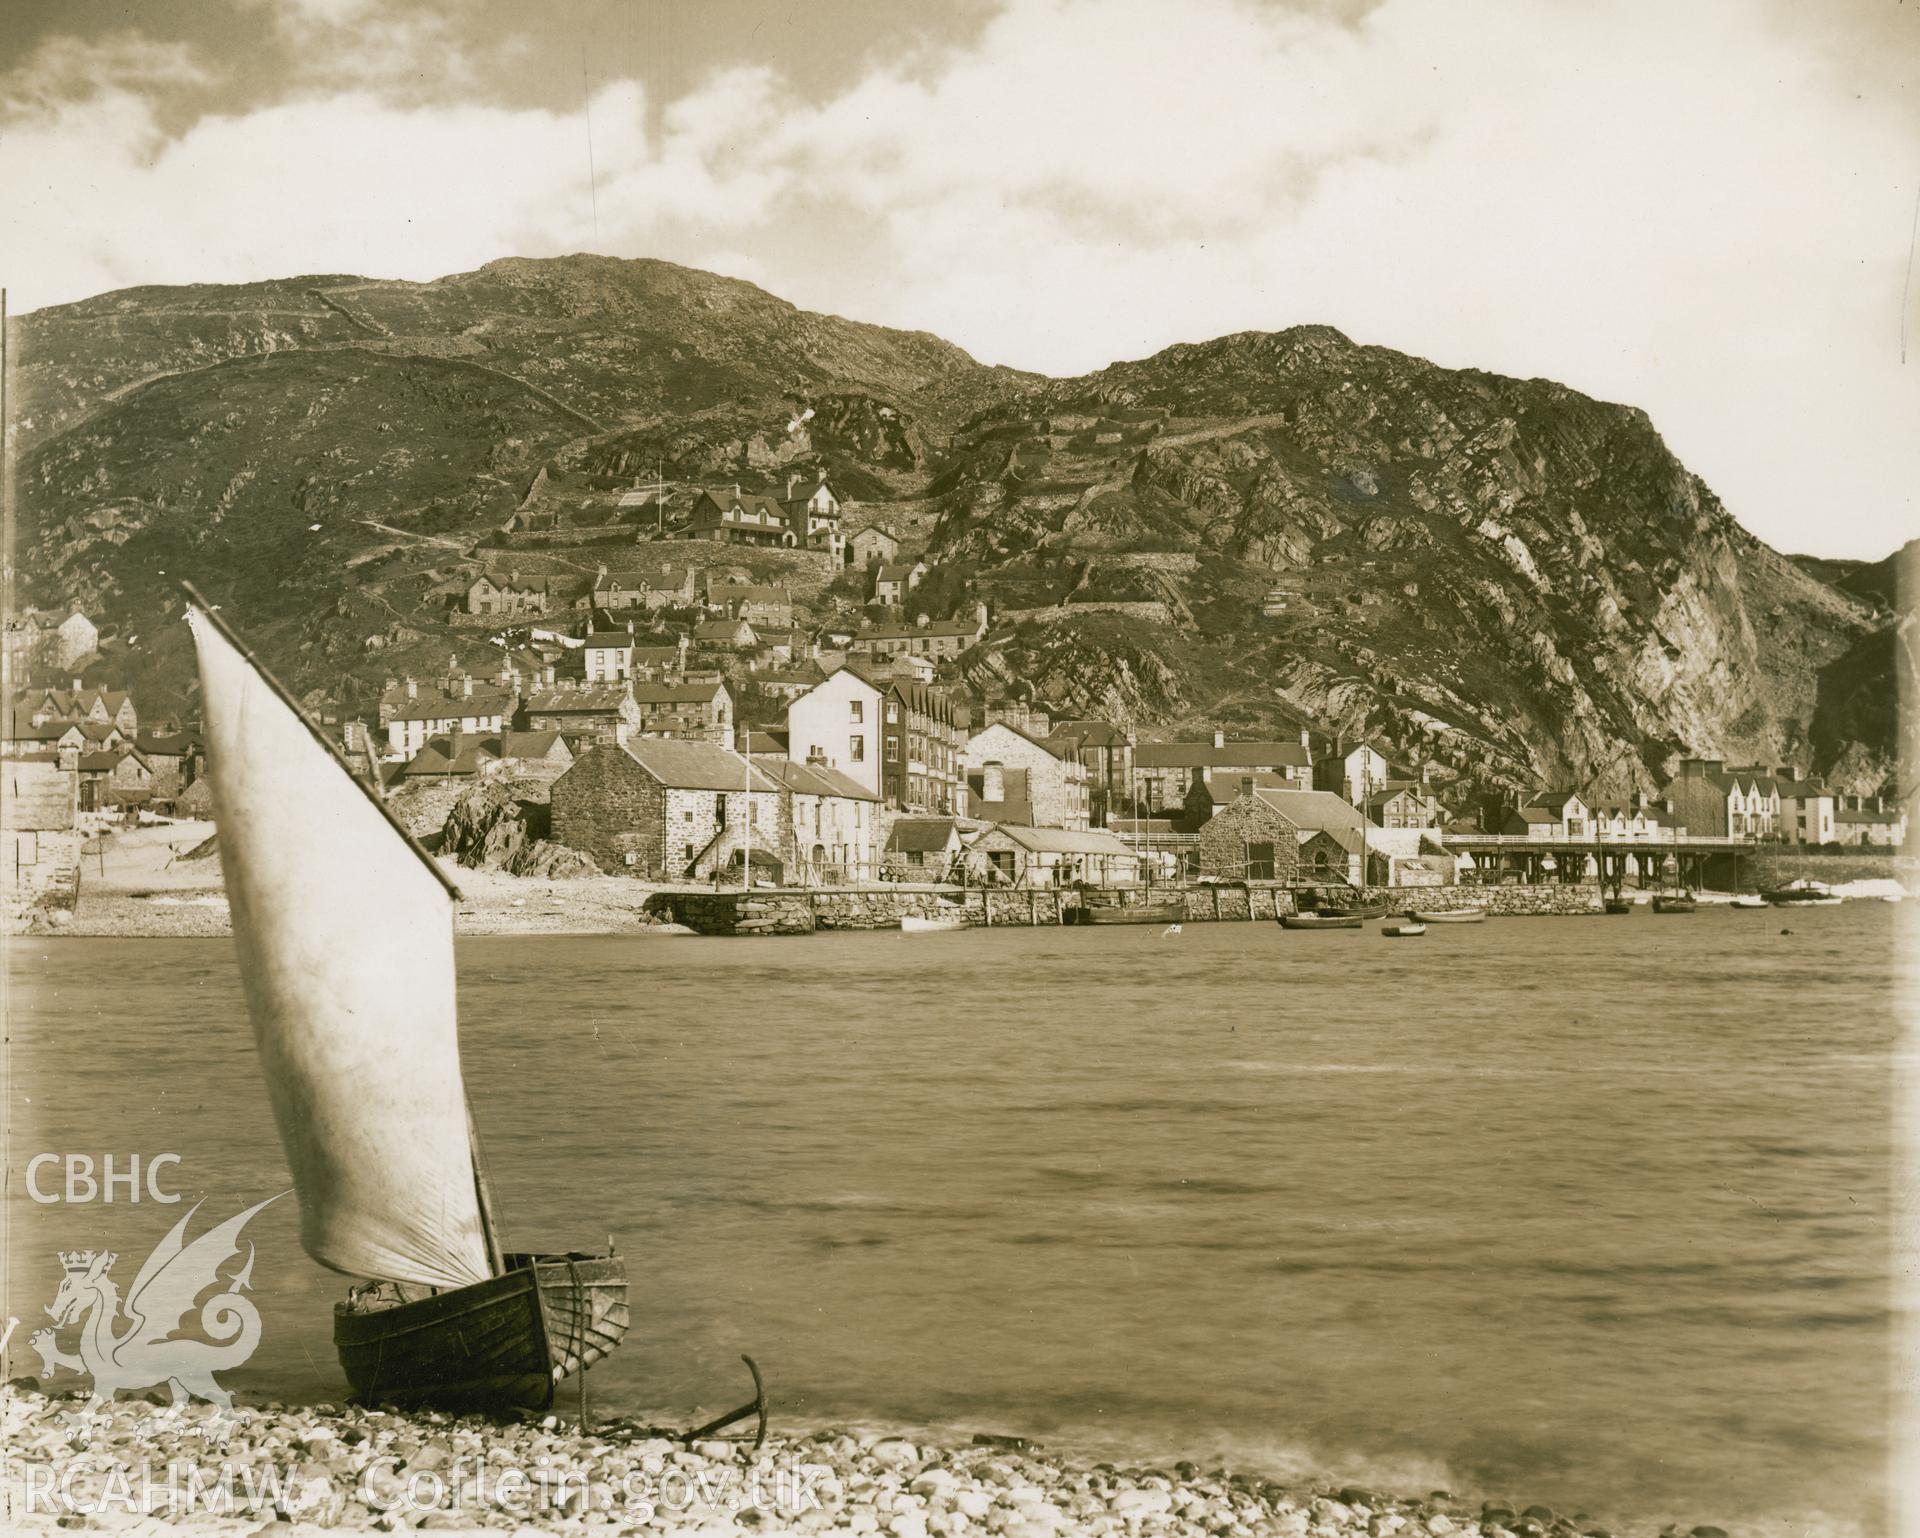 Digital copy of a view of Barmouth.